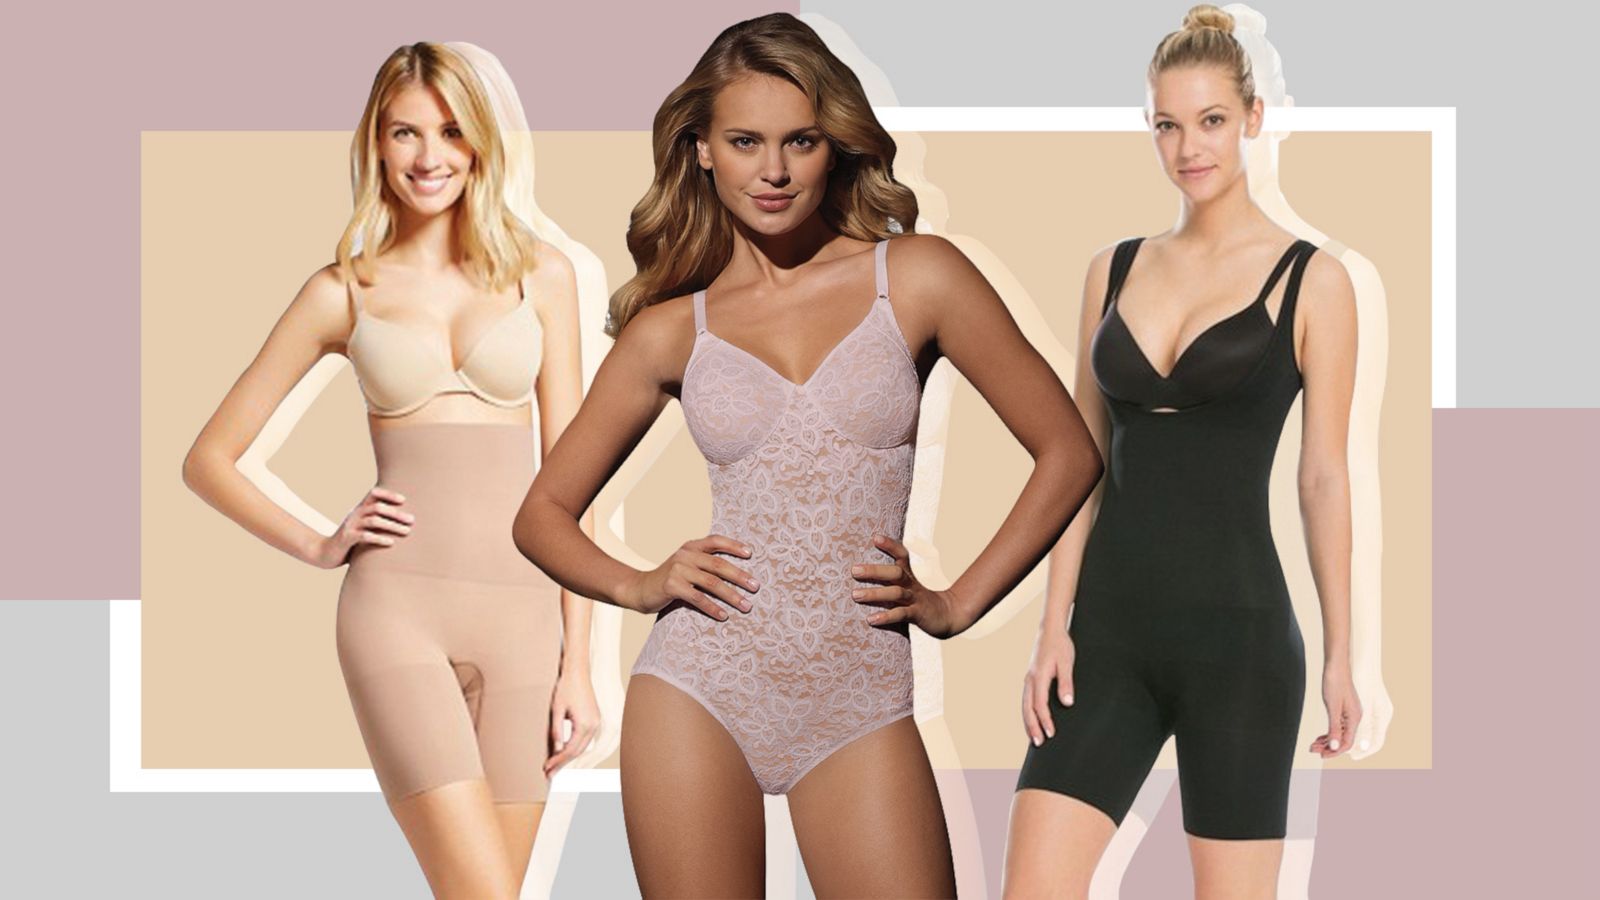 Best Target shapewear: Shop Spanx, Madienform and more